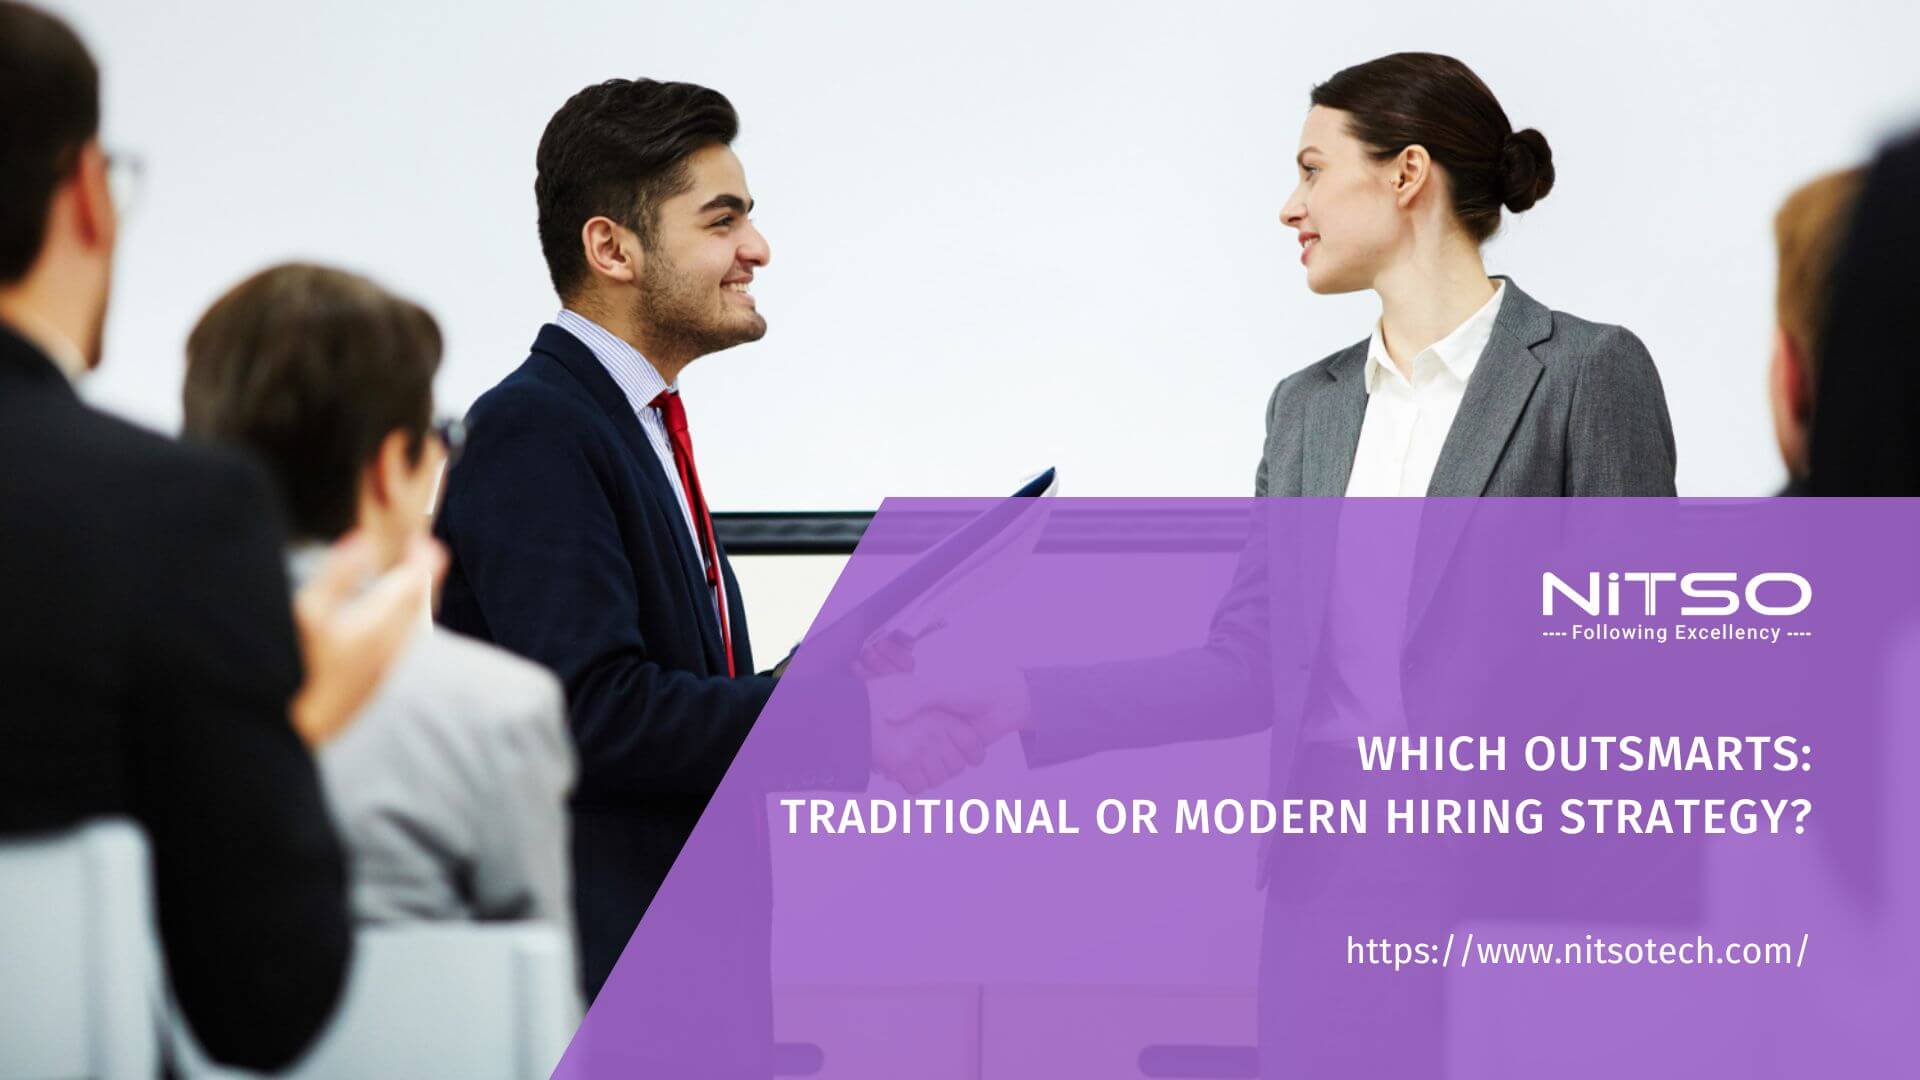 Traditional vs Modern Hiring: Which Approach Is Right for Your Business?